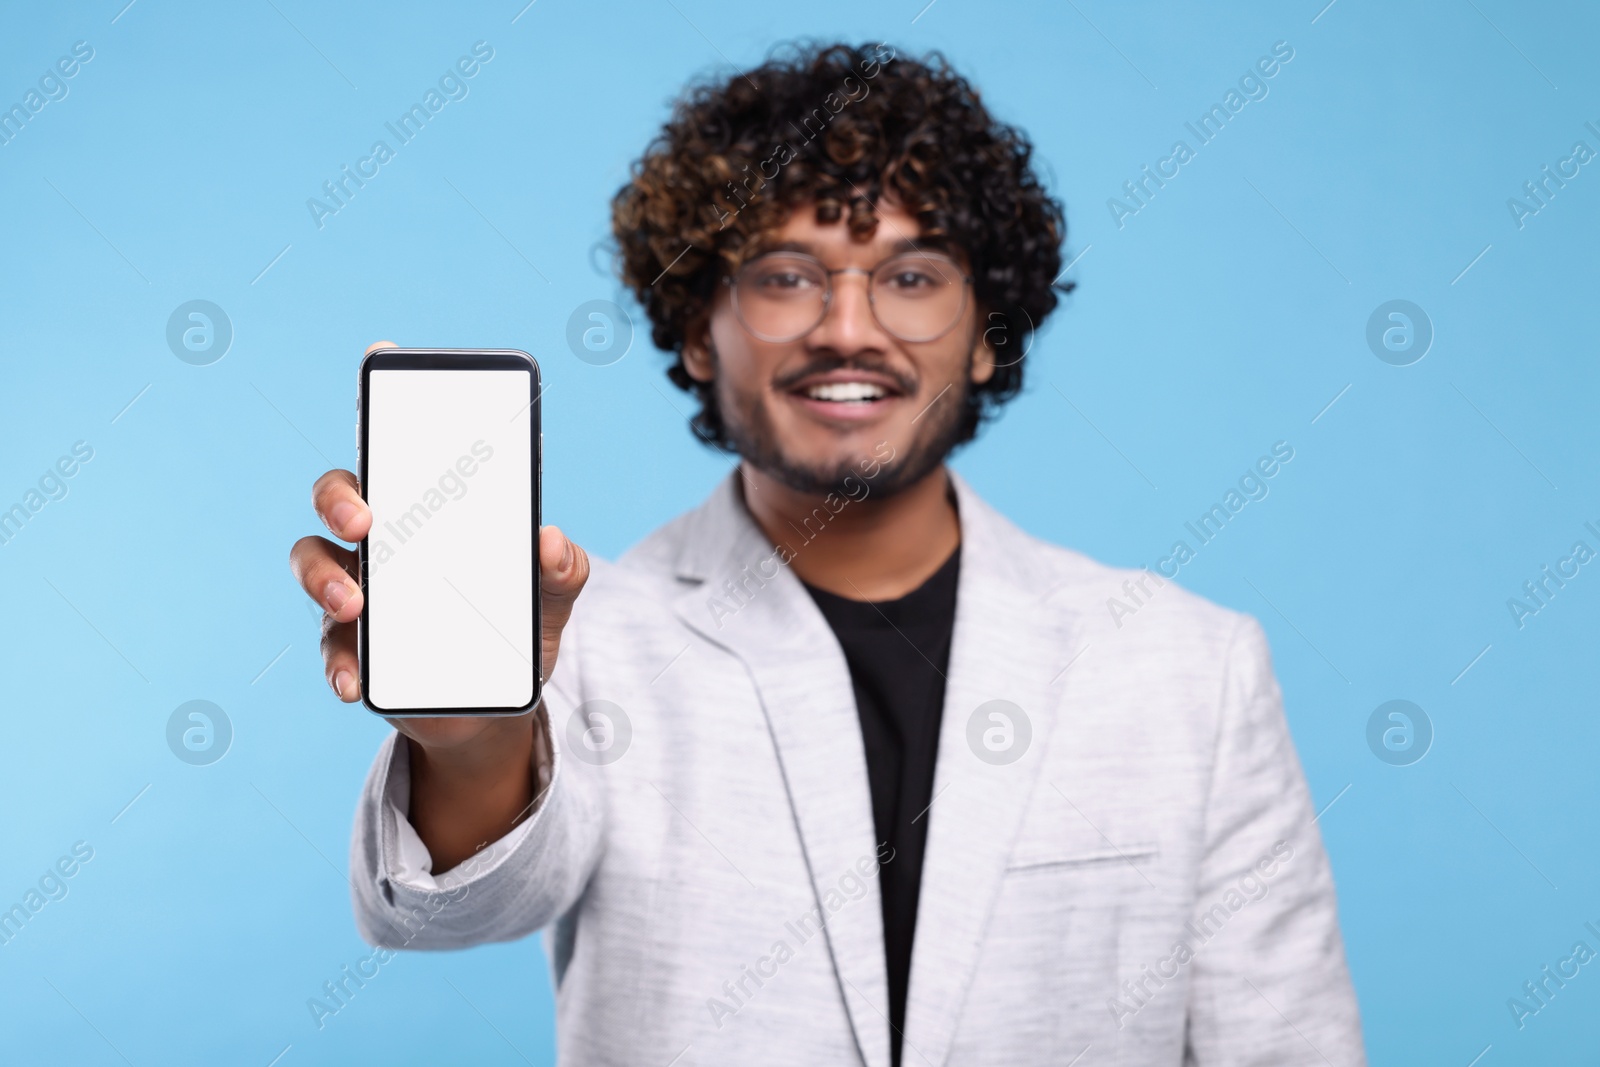 Photo of Handsome smiling man showing smartphone on light blue background, selective focus